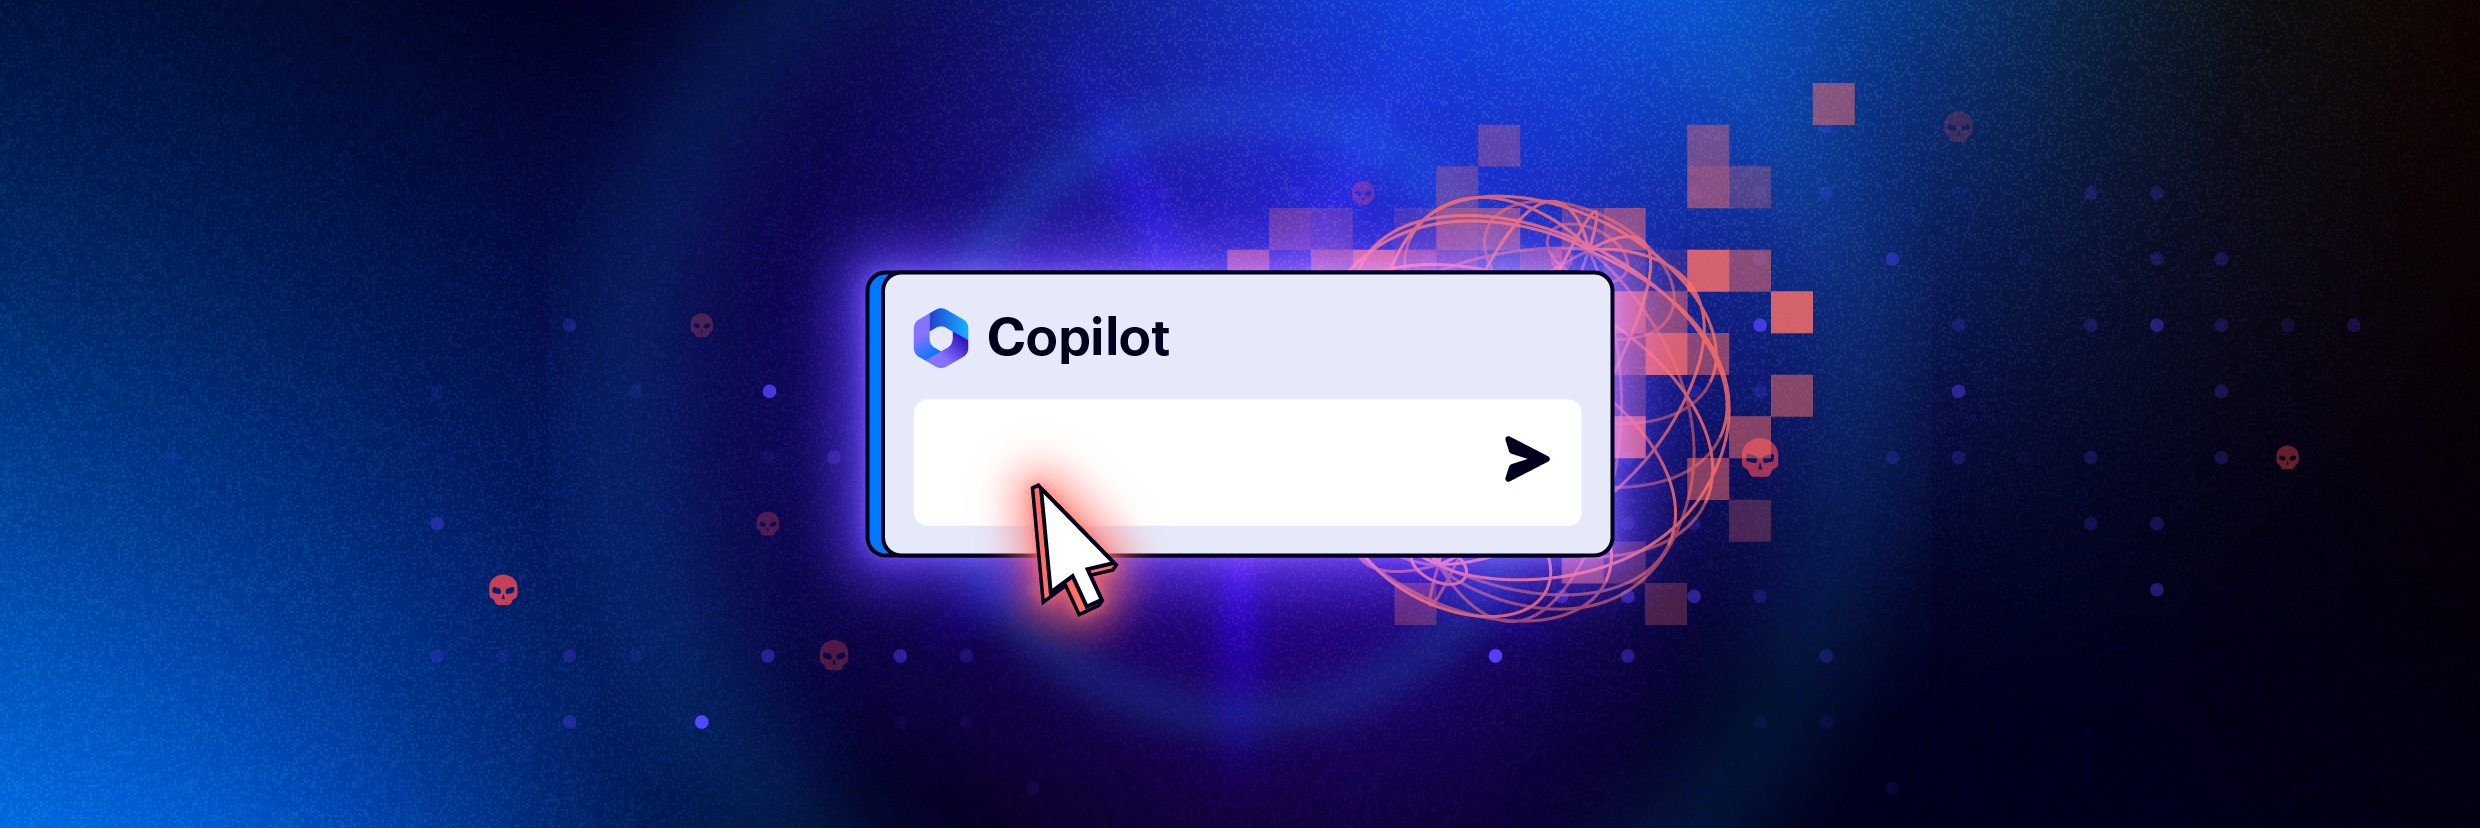 AI at Work with Microsoft Copilot example